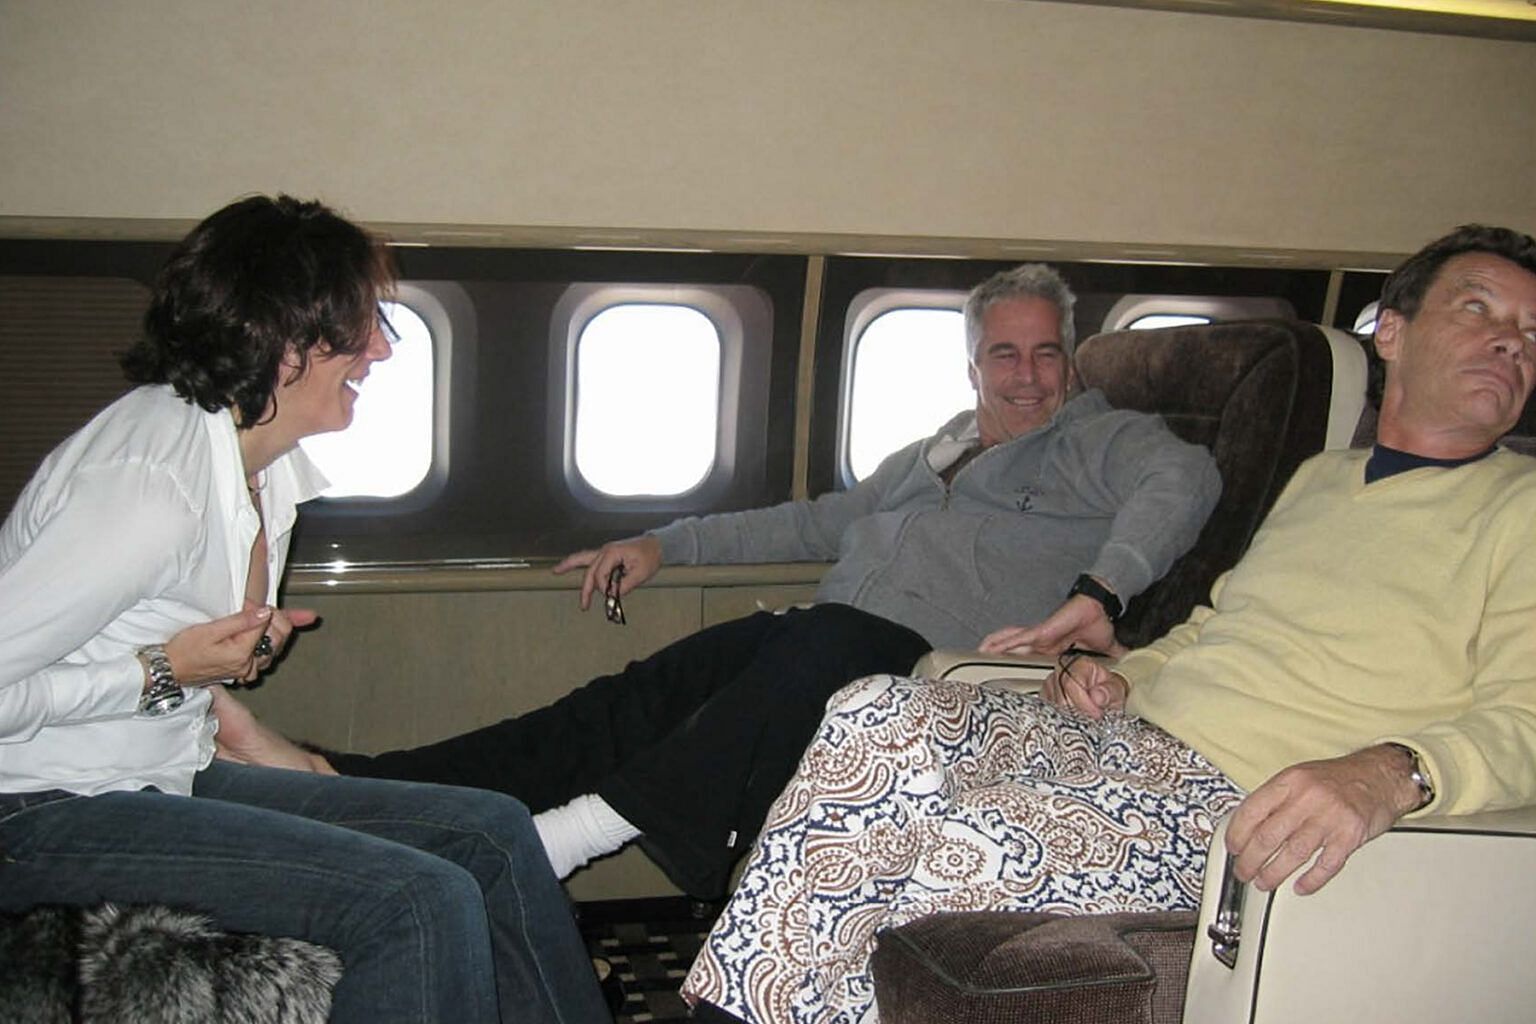 Jean Luc Brunel on a private jet with Ghislaine Maxwell and Jeffrey Epstein (Image via Shutterstock)